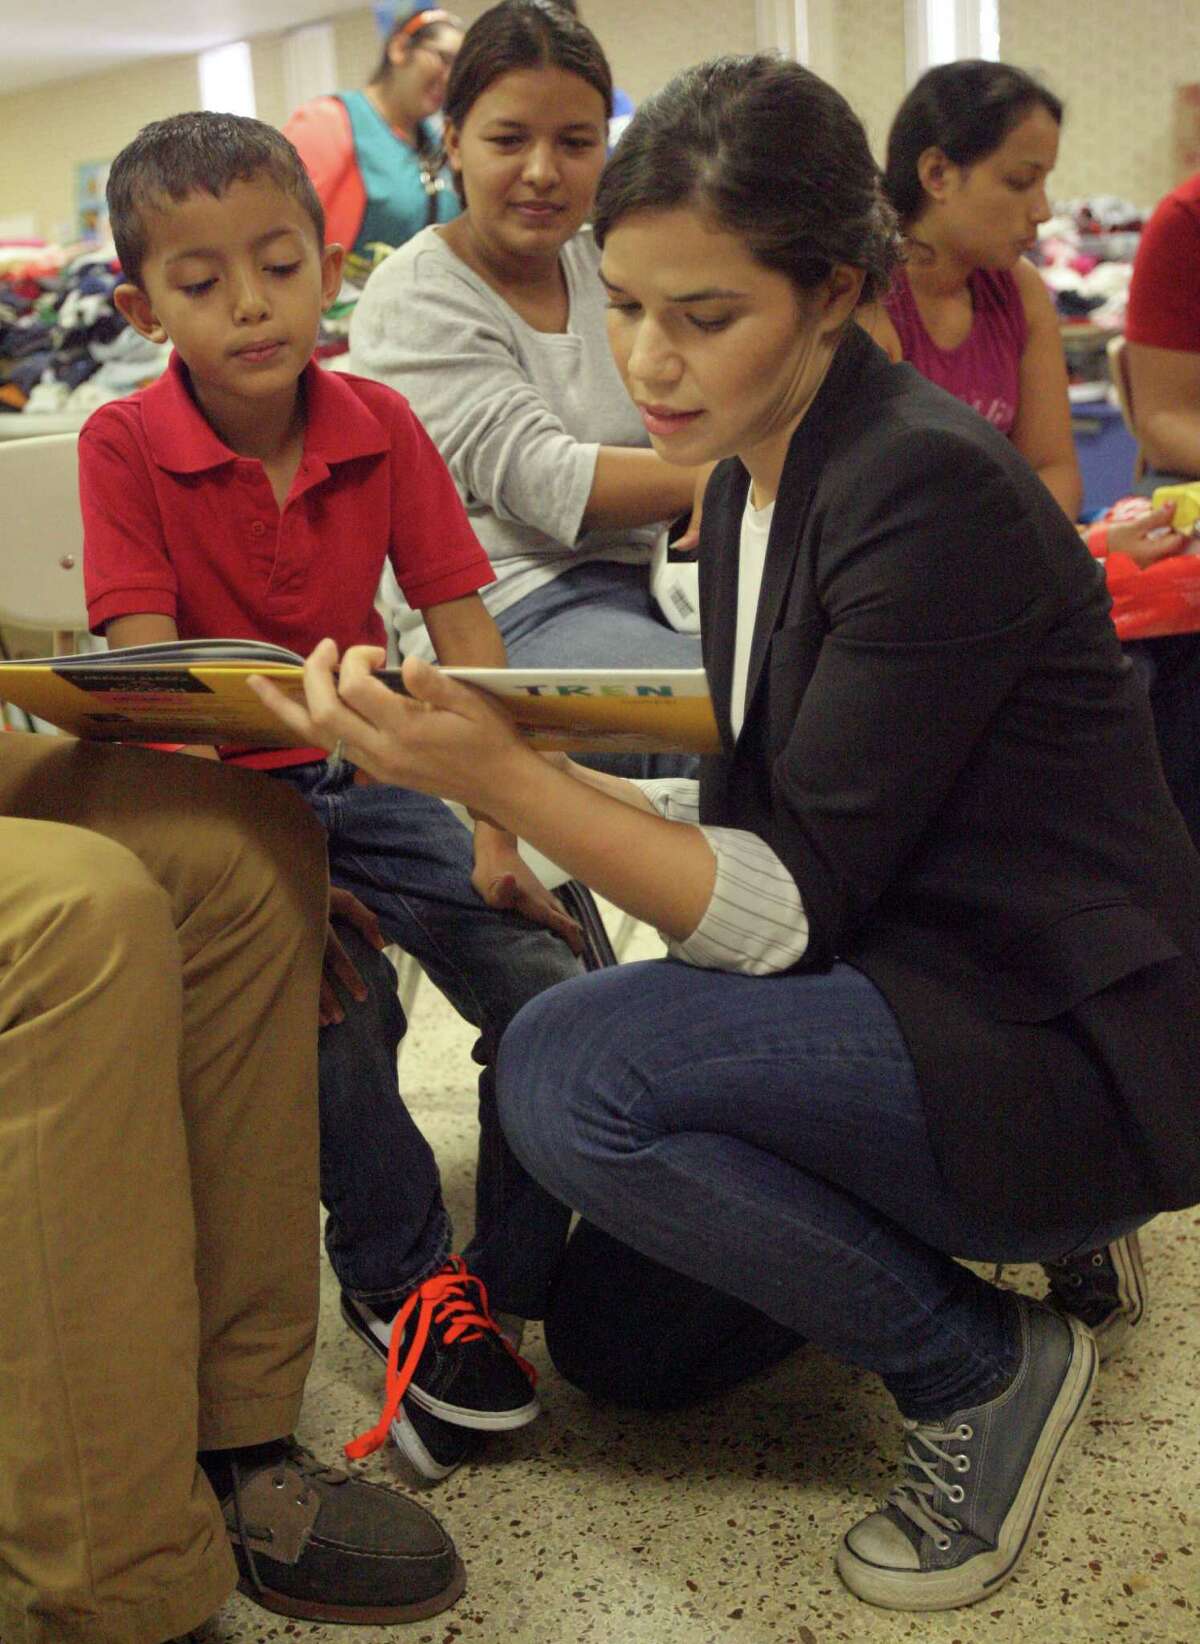 MCALLEN,TX-July 28,2014- Actress America Ferrera plays with a Central American boy during the Hispanic Heritage Foundation humanitarian project at Sacred Heart in McAllen Monday July 27,2014. Photo by Delcia Lopez/McAllen Monitor